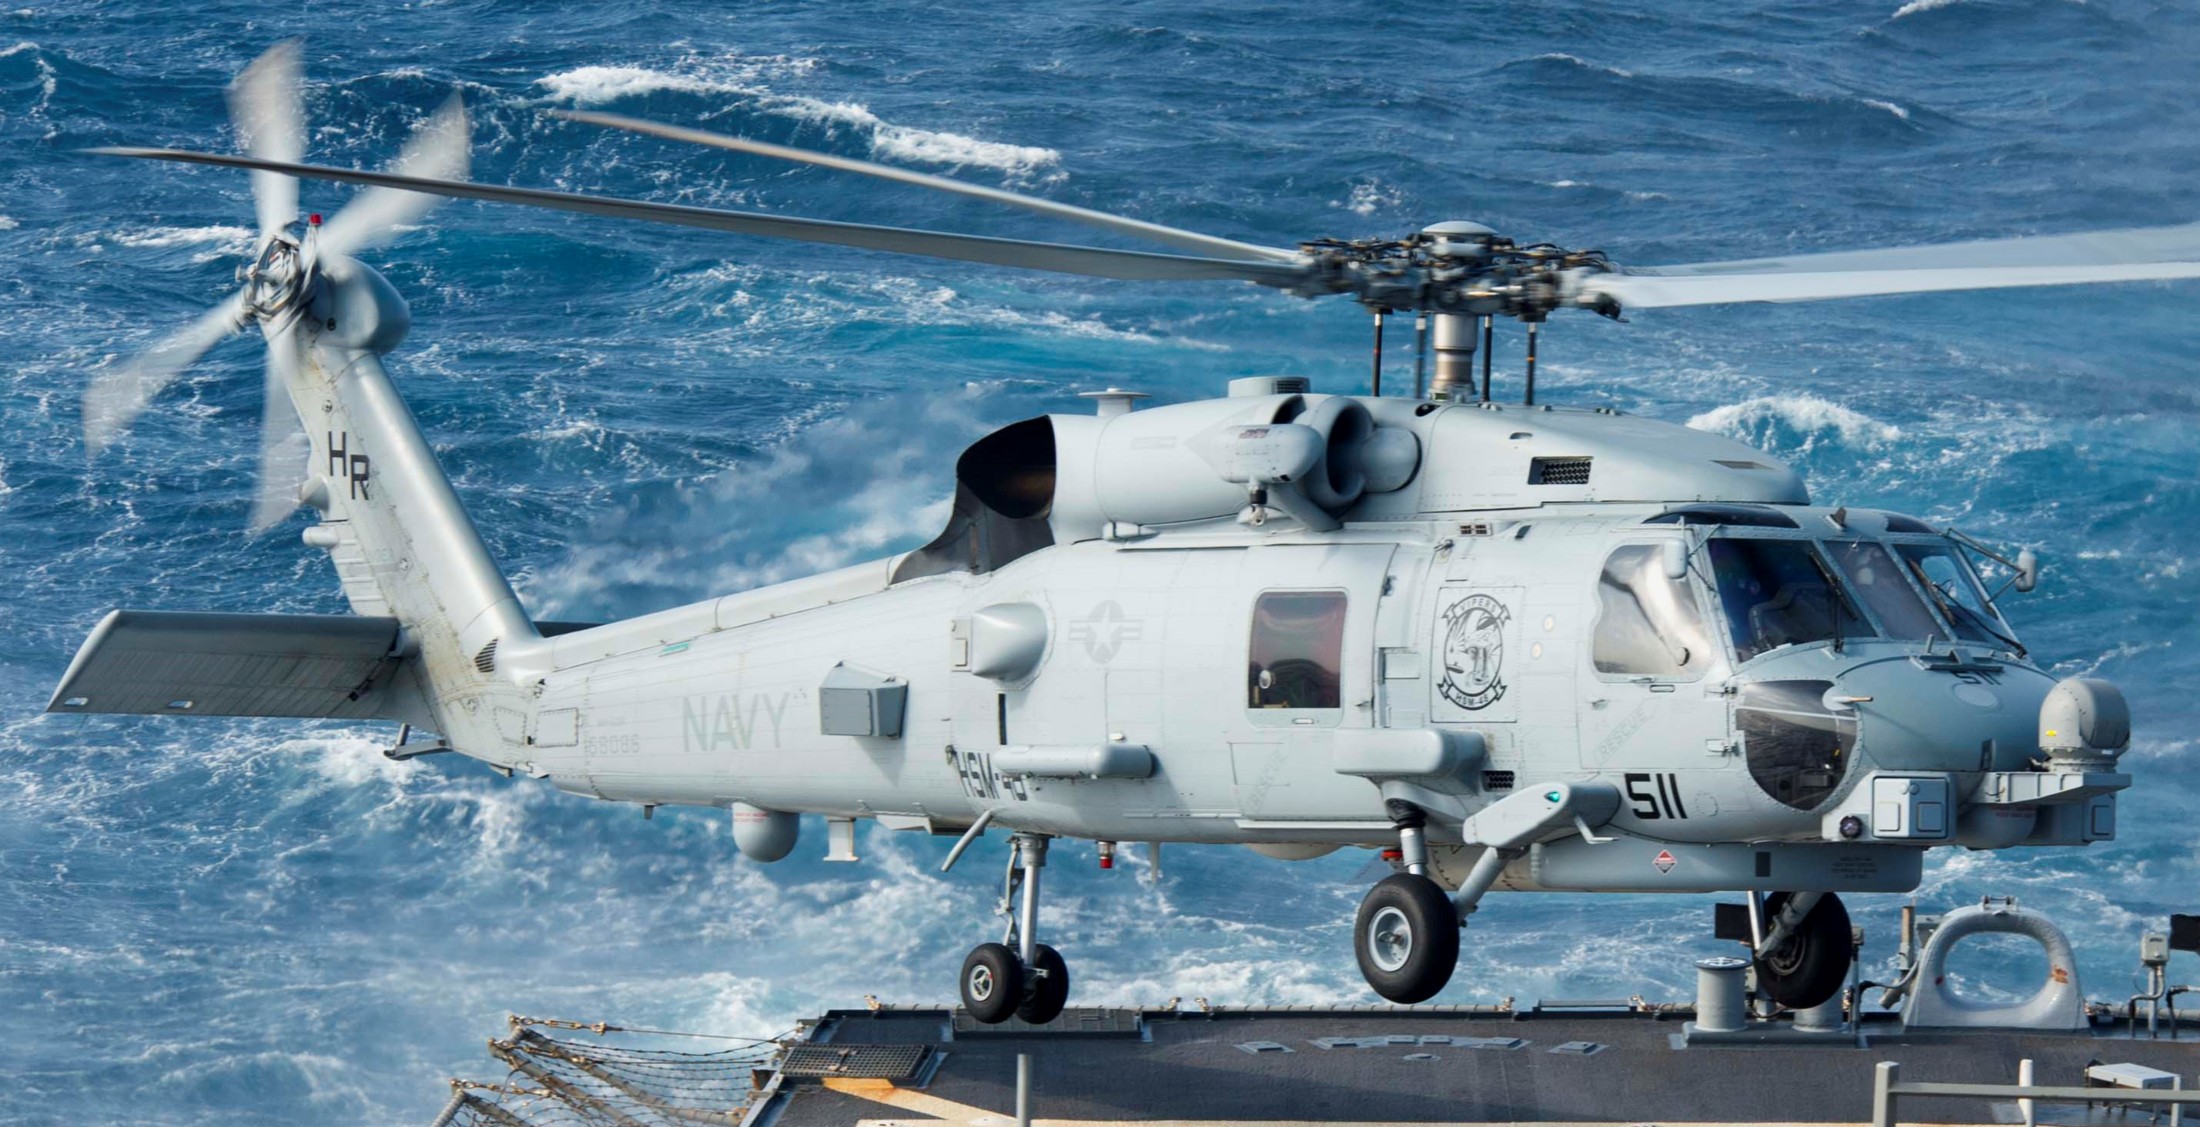 hsm-48 vipers helicopter maritime strike squadron mh-60r seahawk 2015 10 uss cole ddg-67